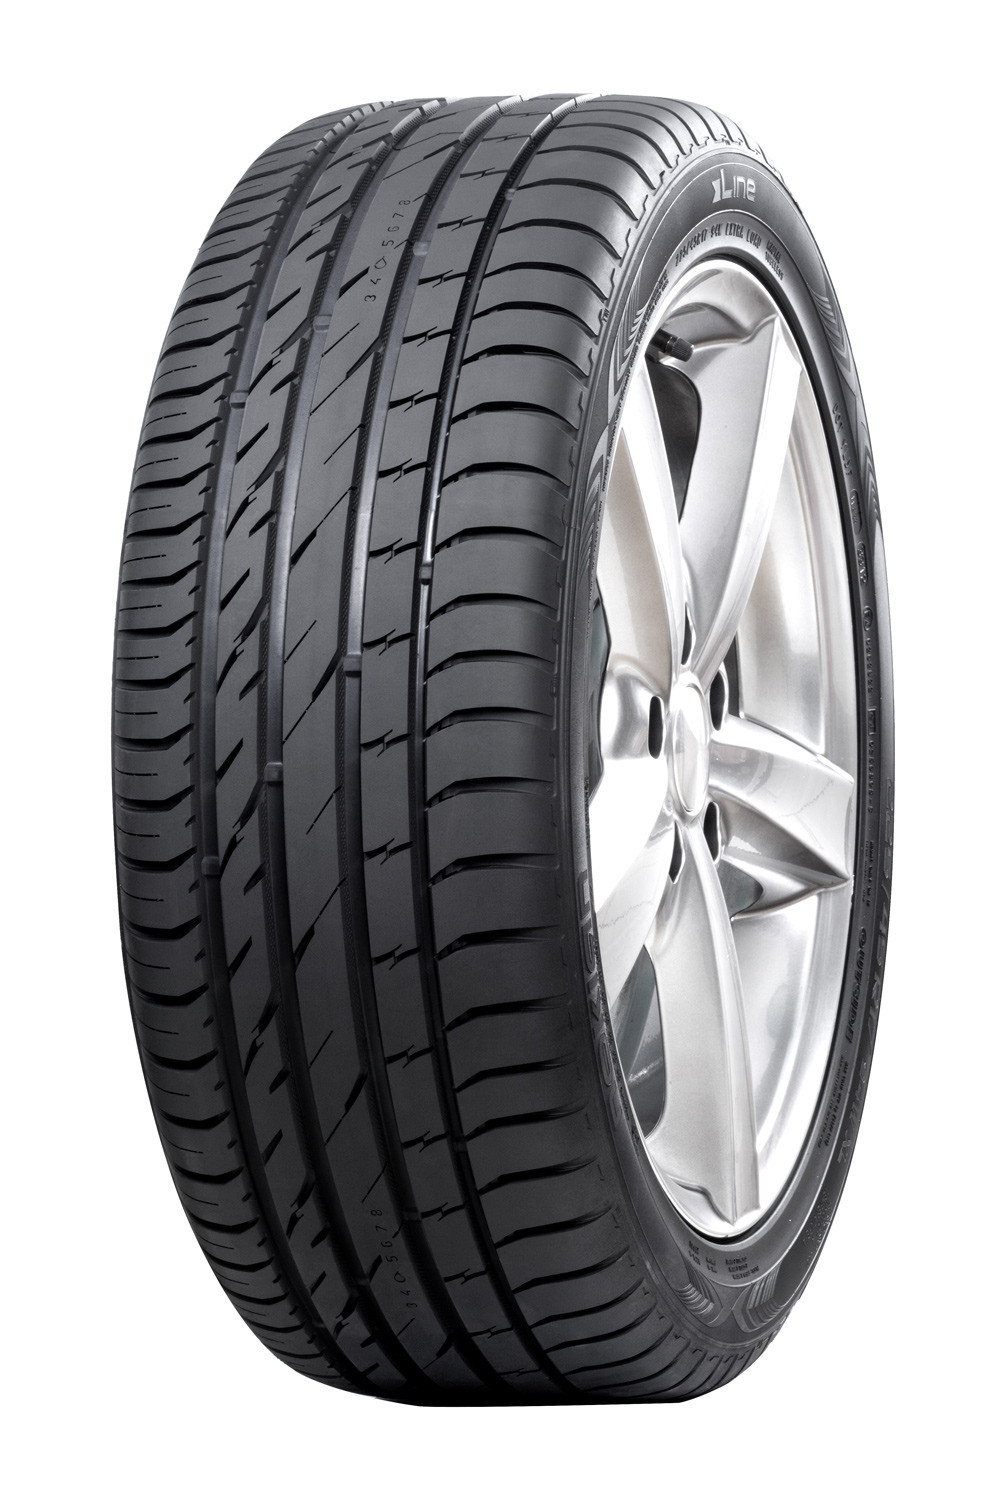 To read Industrialize Characteristic Anvelopa Vara 215/60R16 99V Nokian Line | Auto Soft